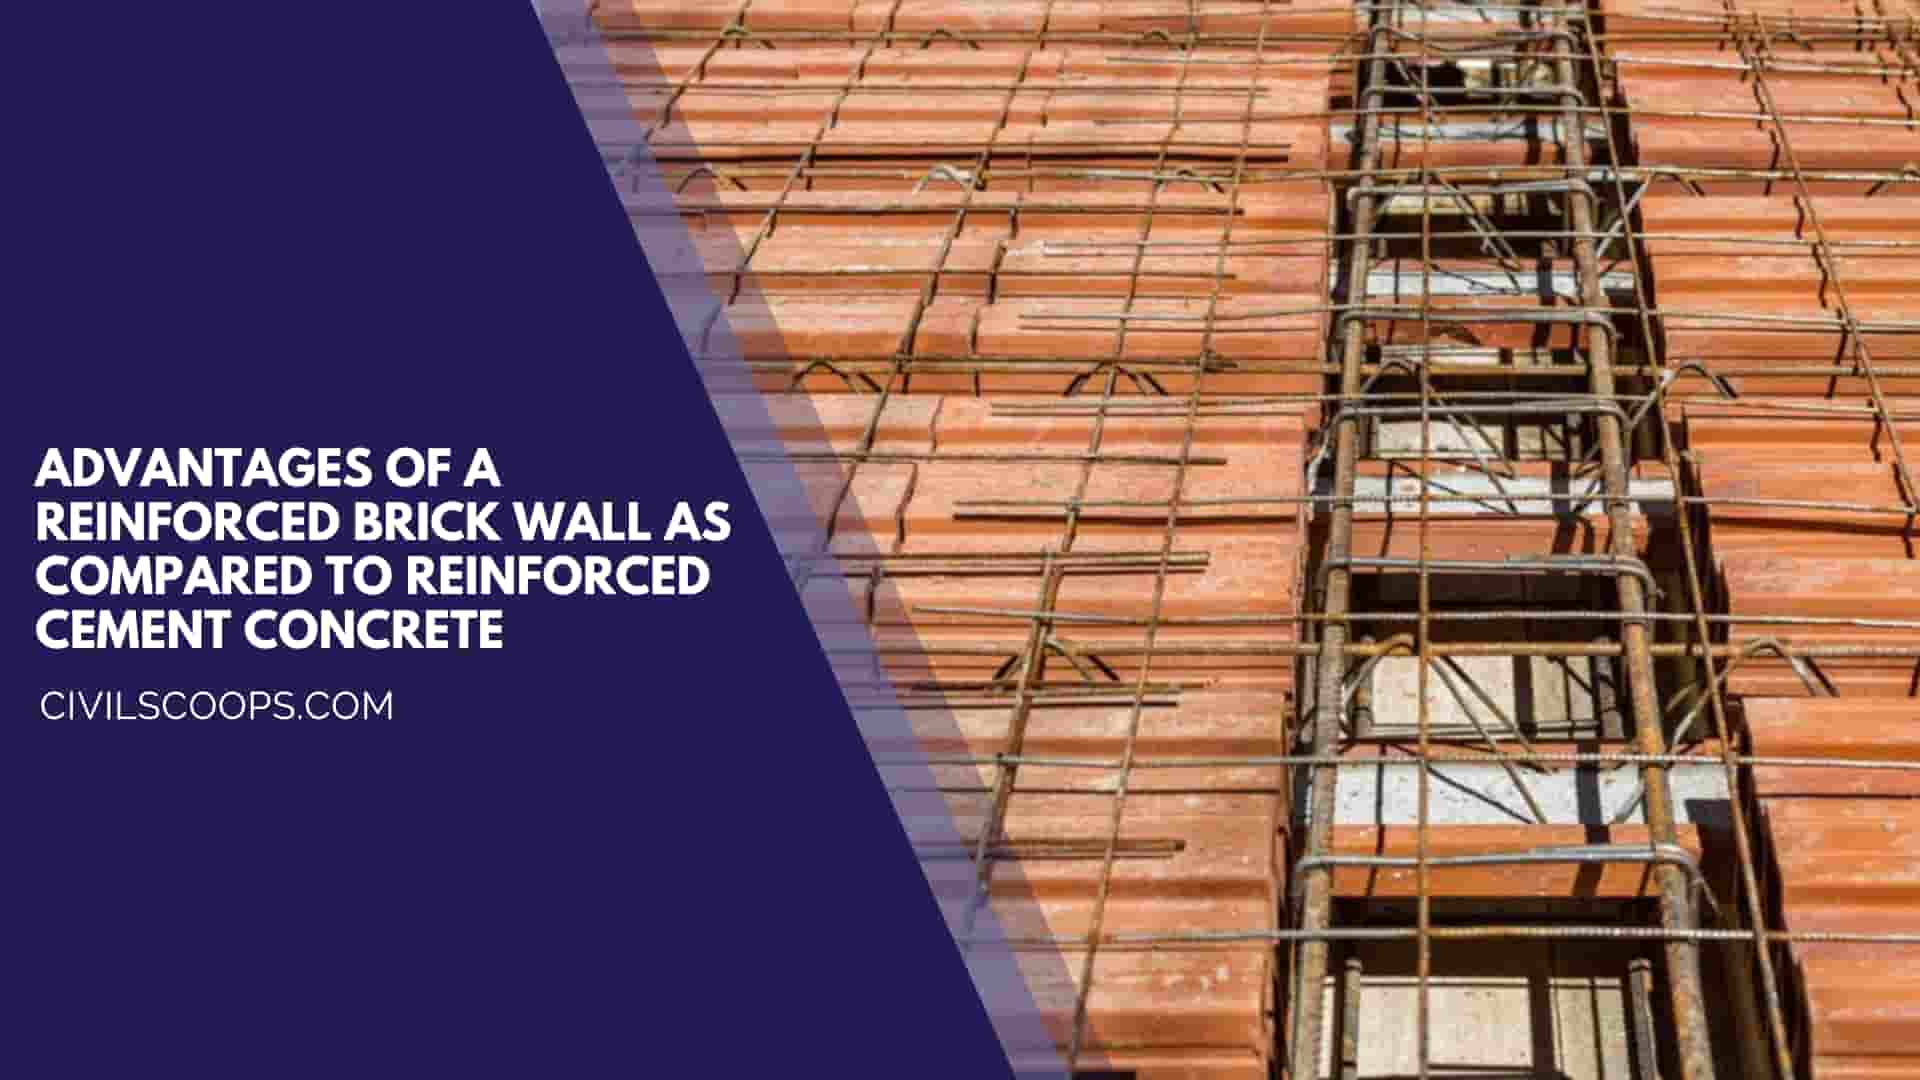 Advantages of a Reinforced Brick Wall as Compared to Reinforced Cement Concrete